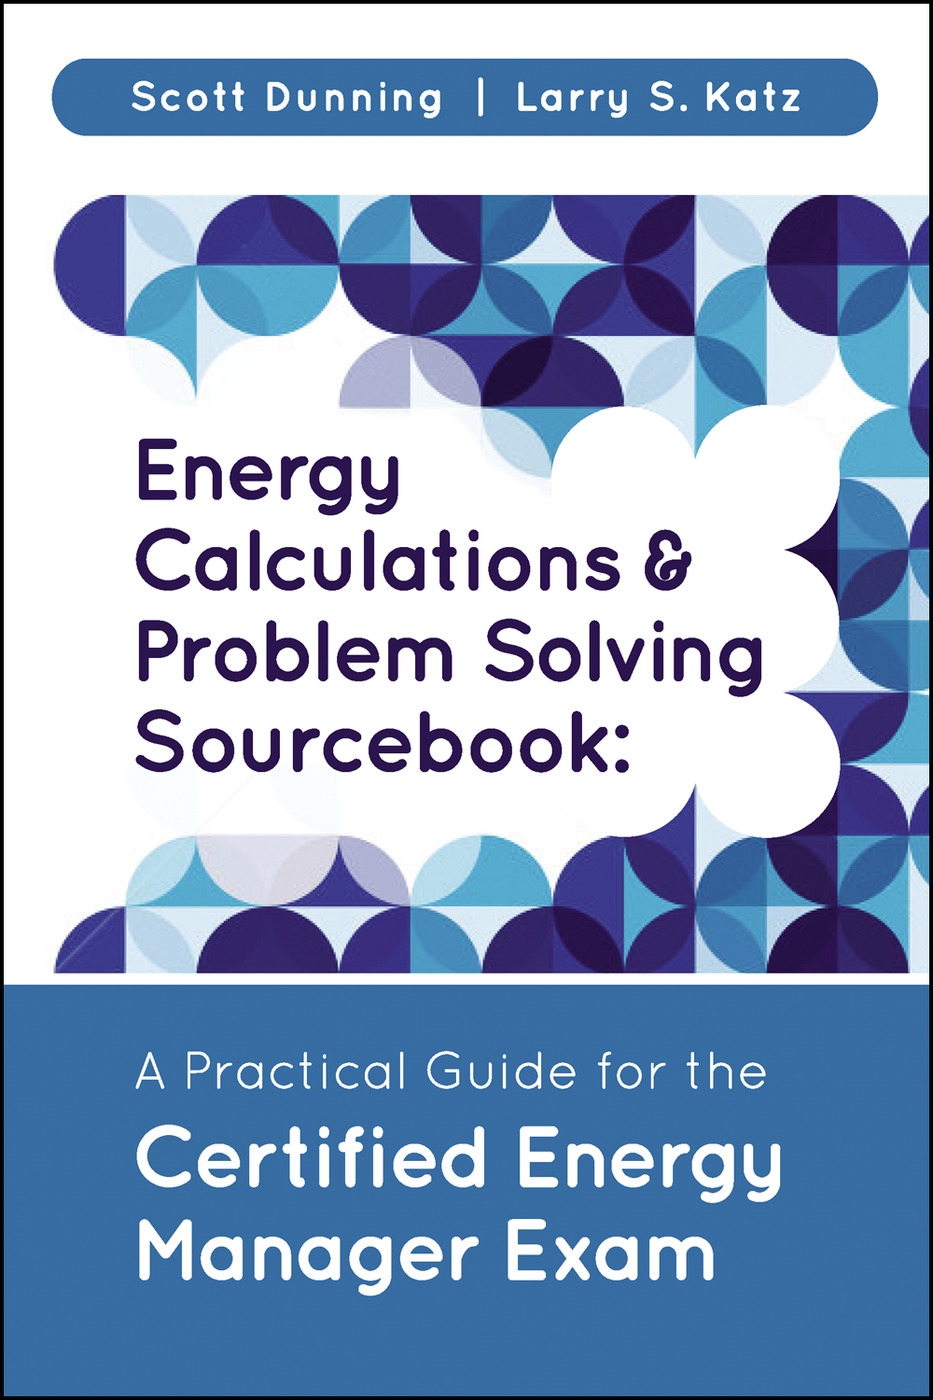 Energy Calculations & Problem Solving Sourcebook: A Practical Guide for the Certified Energy Manager Exam